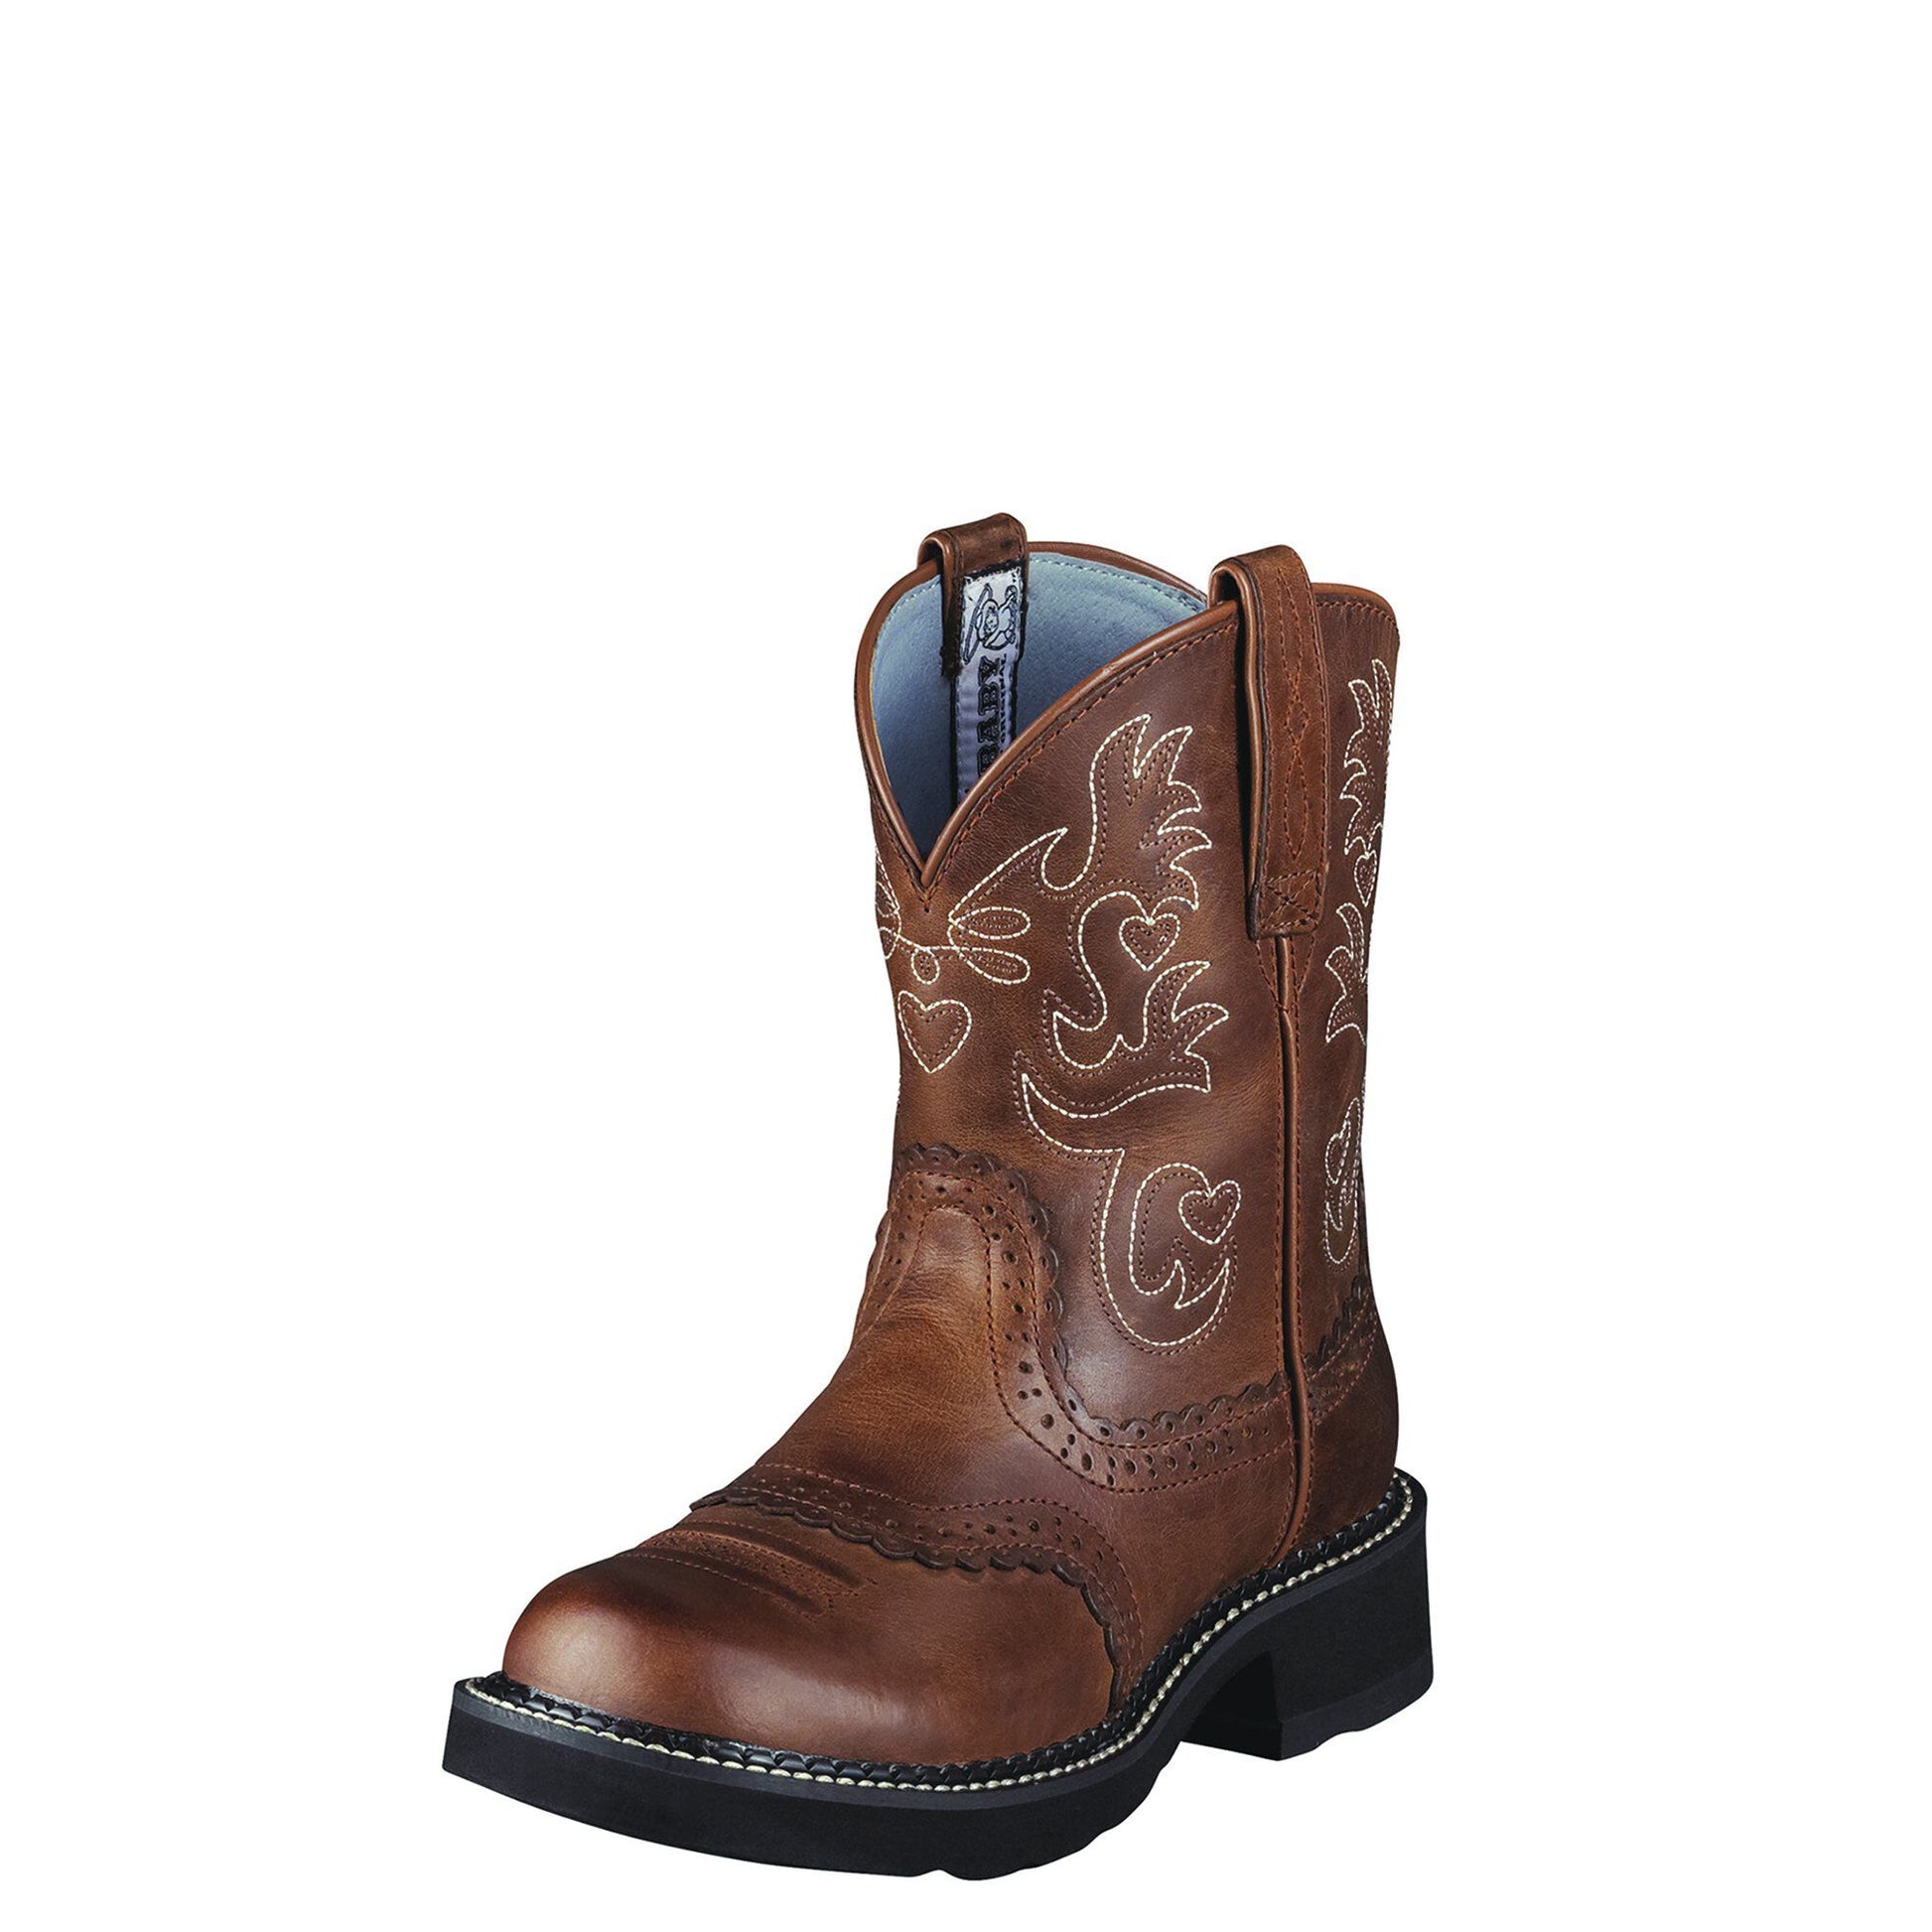 Ariat Women's Fatbaby Saddle Boot - Russet Rebel - French's Boots